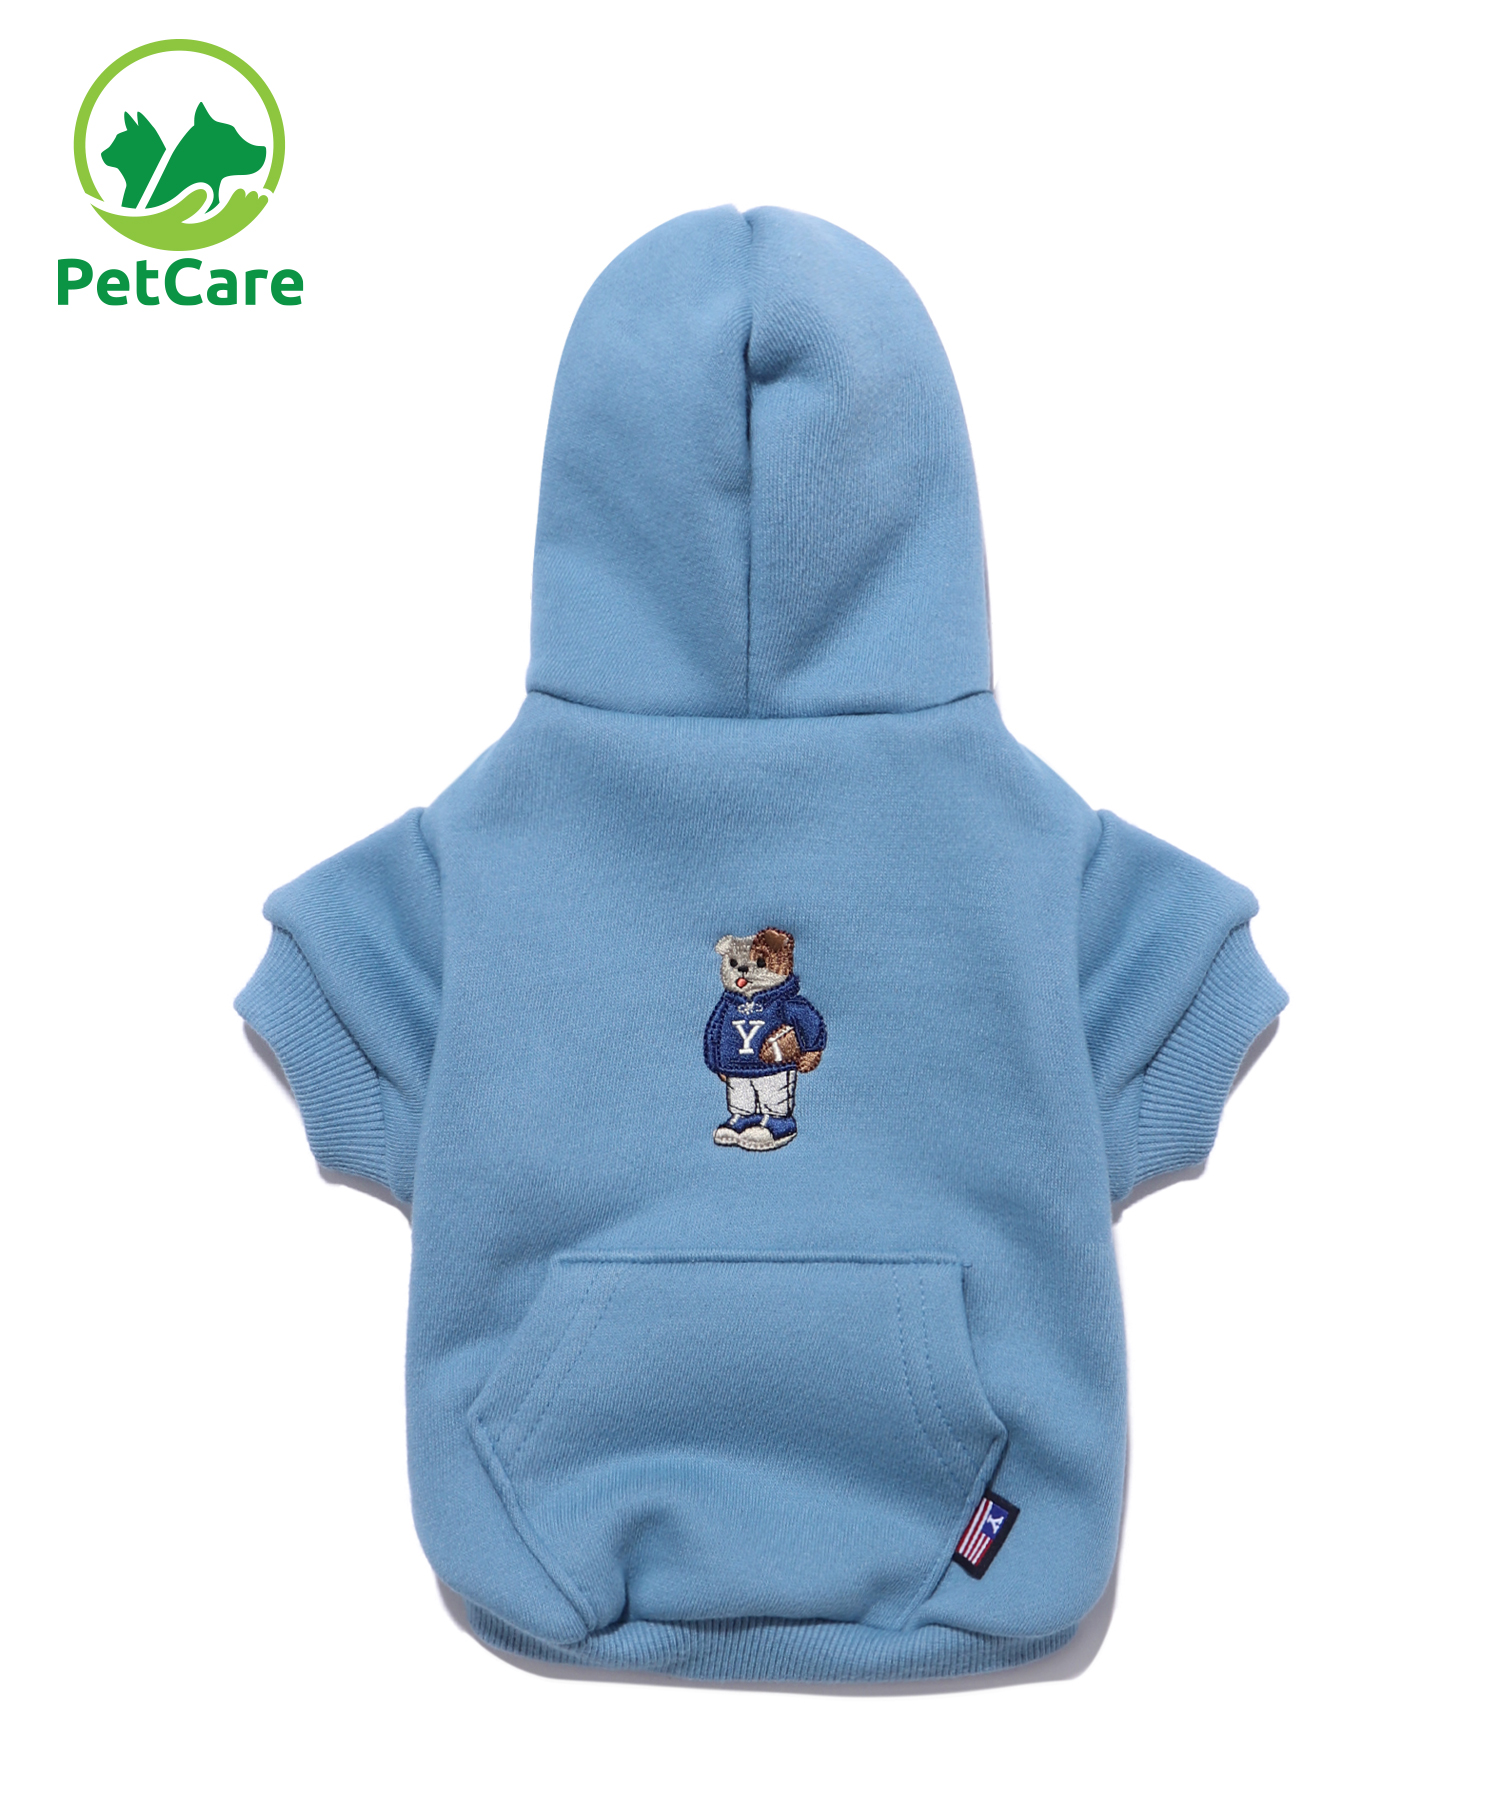 EMBROIDERY UNIVERSITY DAN DOGGY HOODIE BABY BLUE